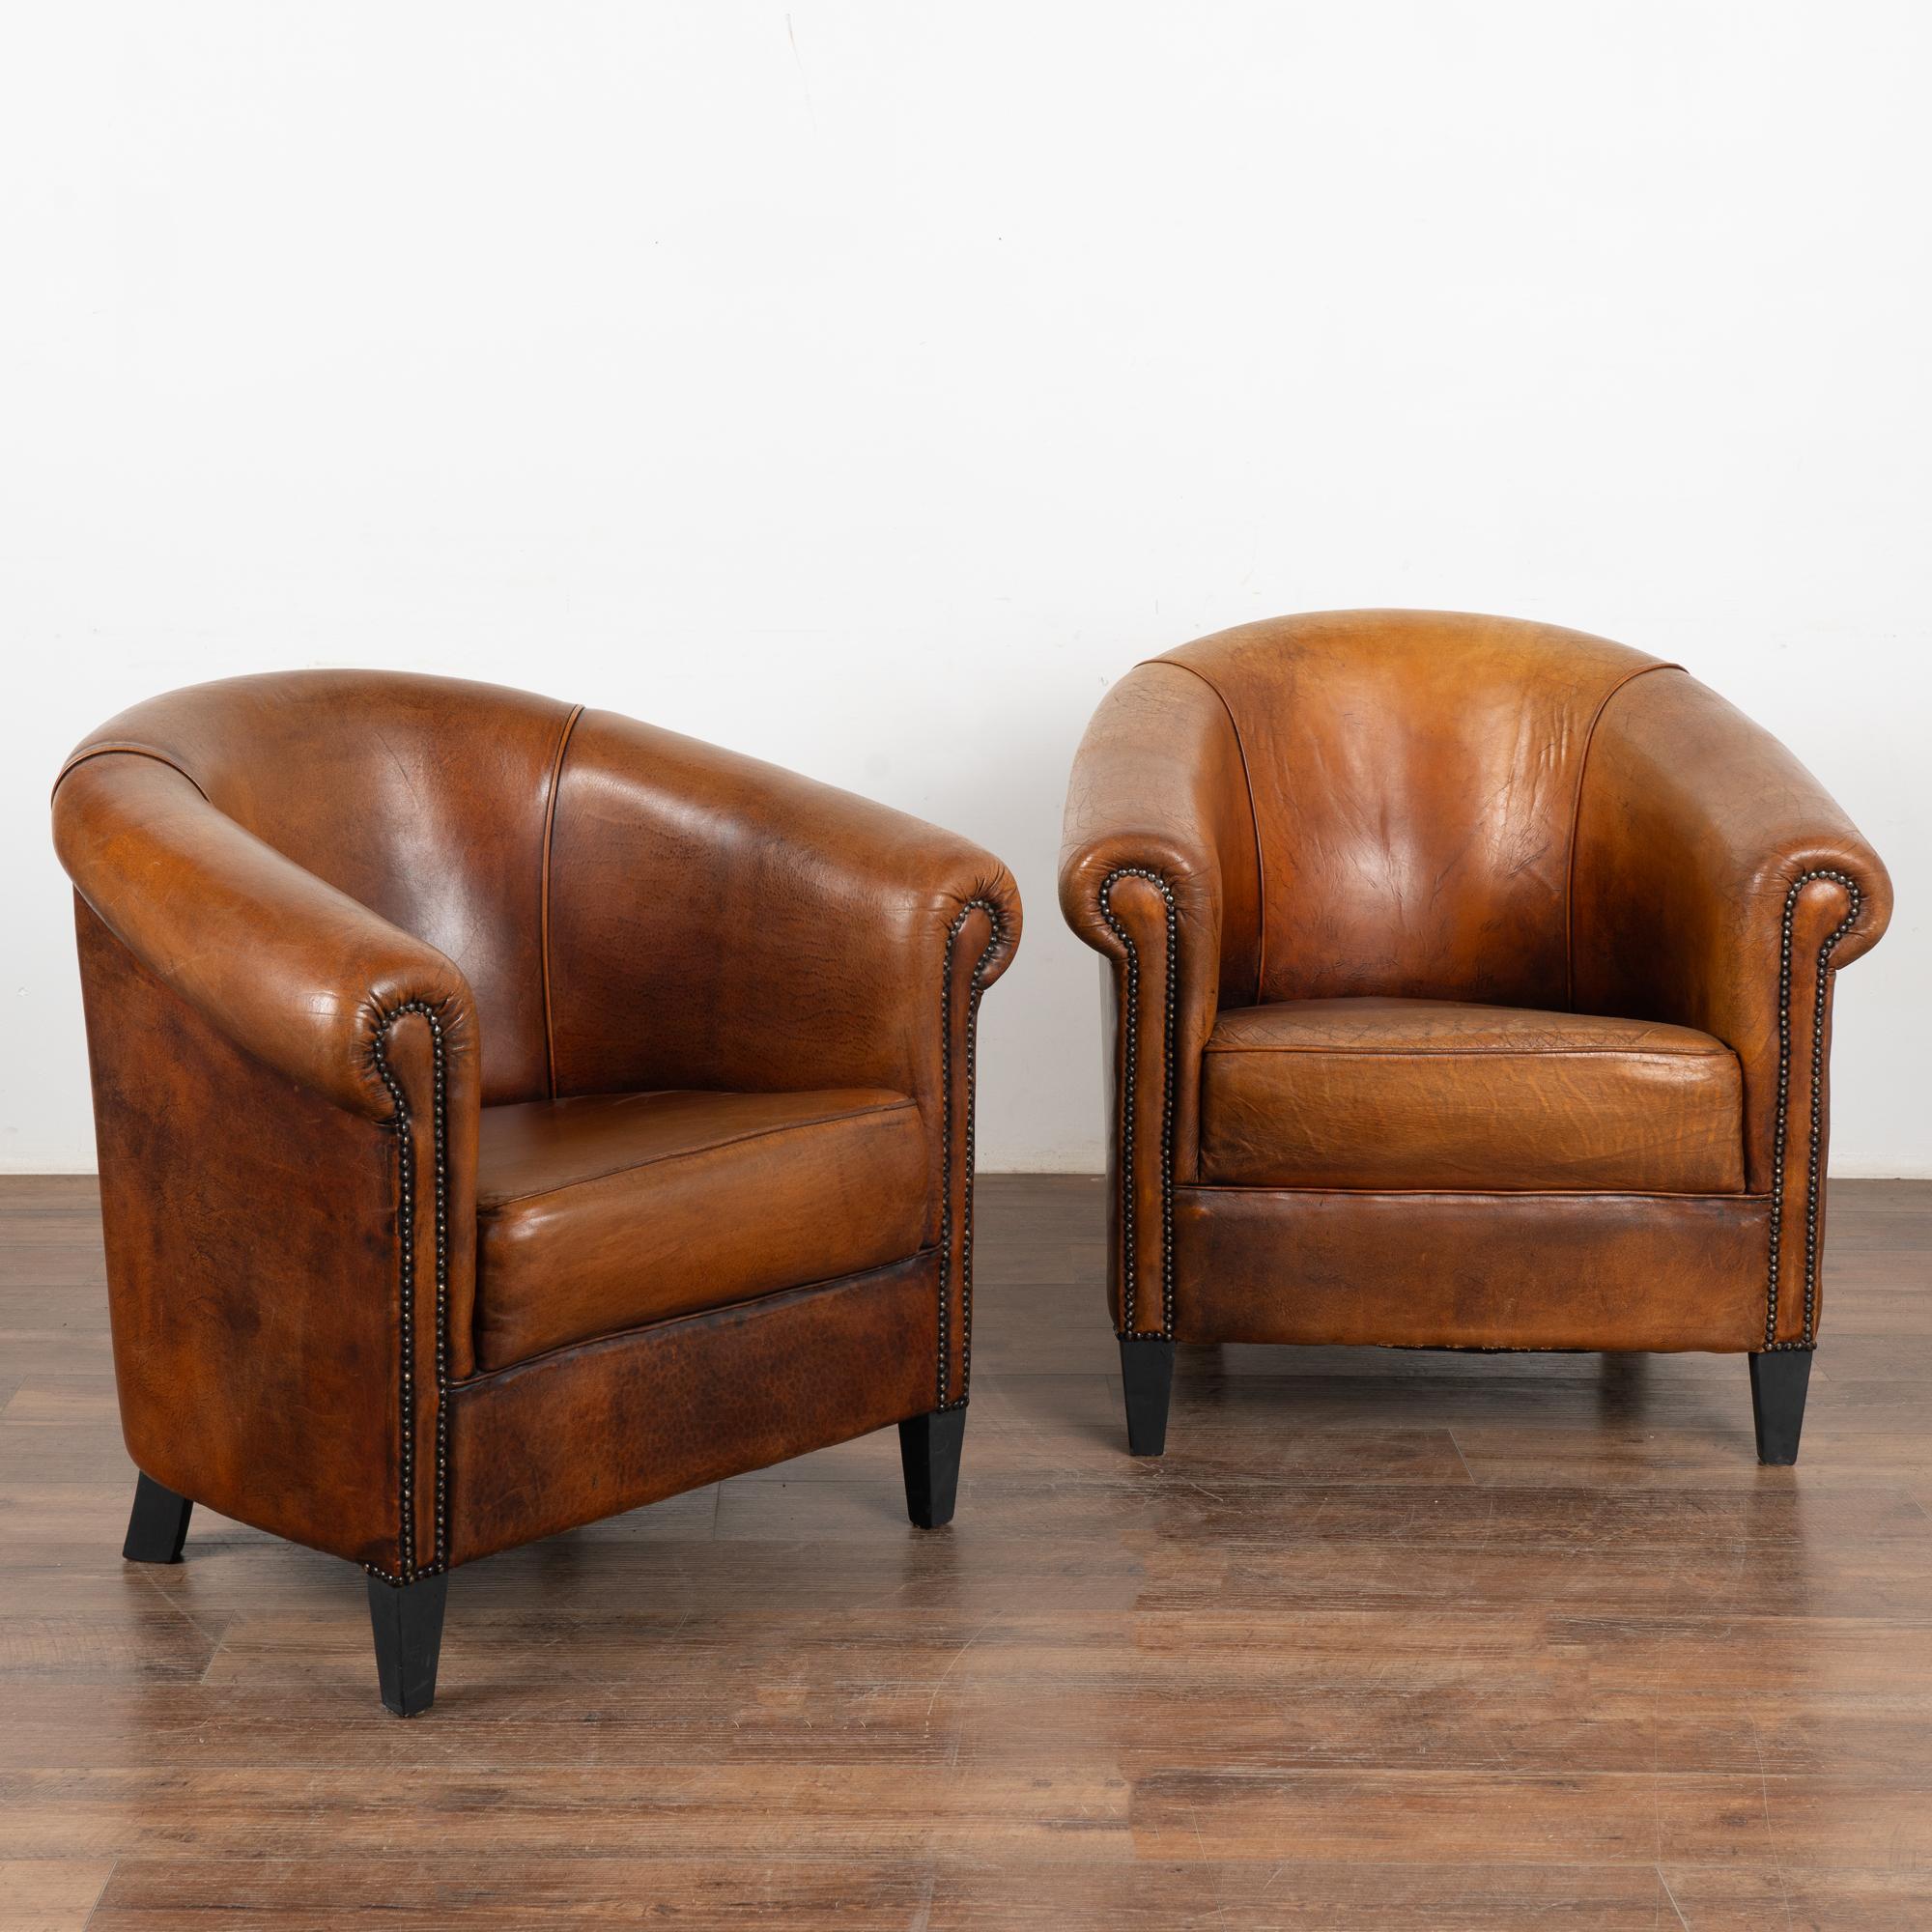 Pair, brown leather tub club chairs with hard wood legs.
Upholstered in vintage brown sheep leather with rich patina, slender rolled arms with nail head trim.
Sold in original vintage condition; solid/stable and sits comfortably snug. Typical age